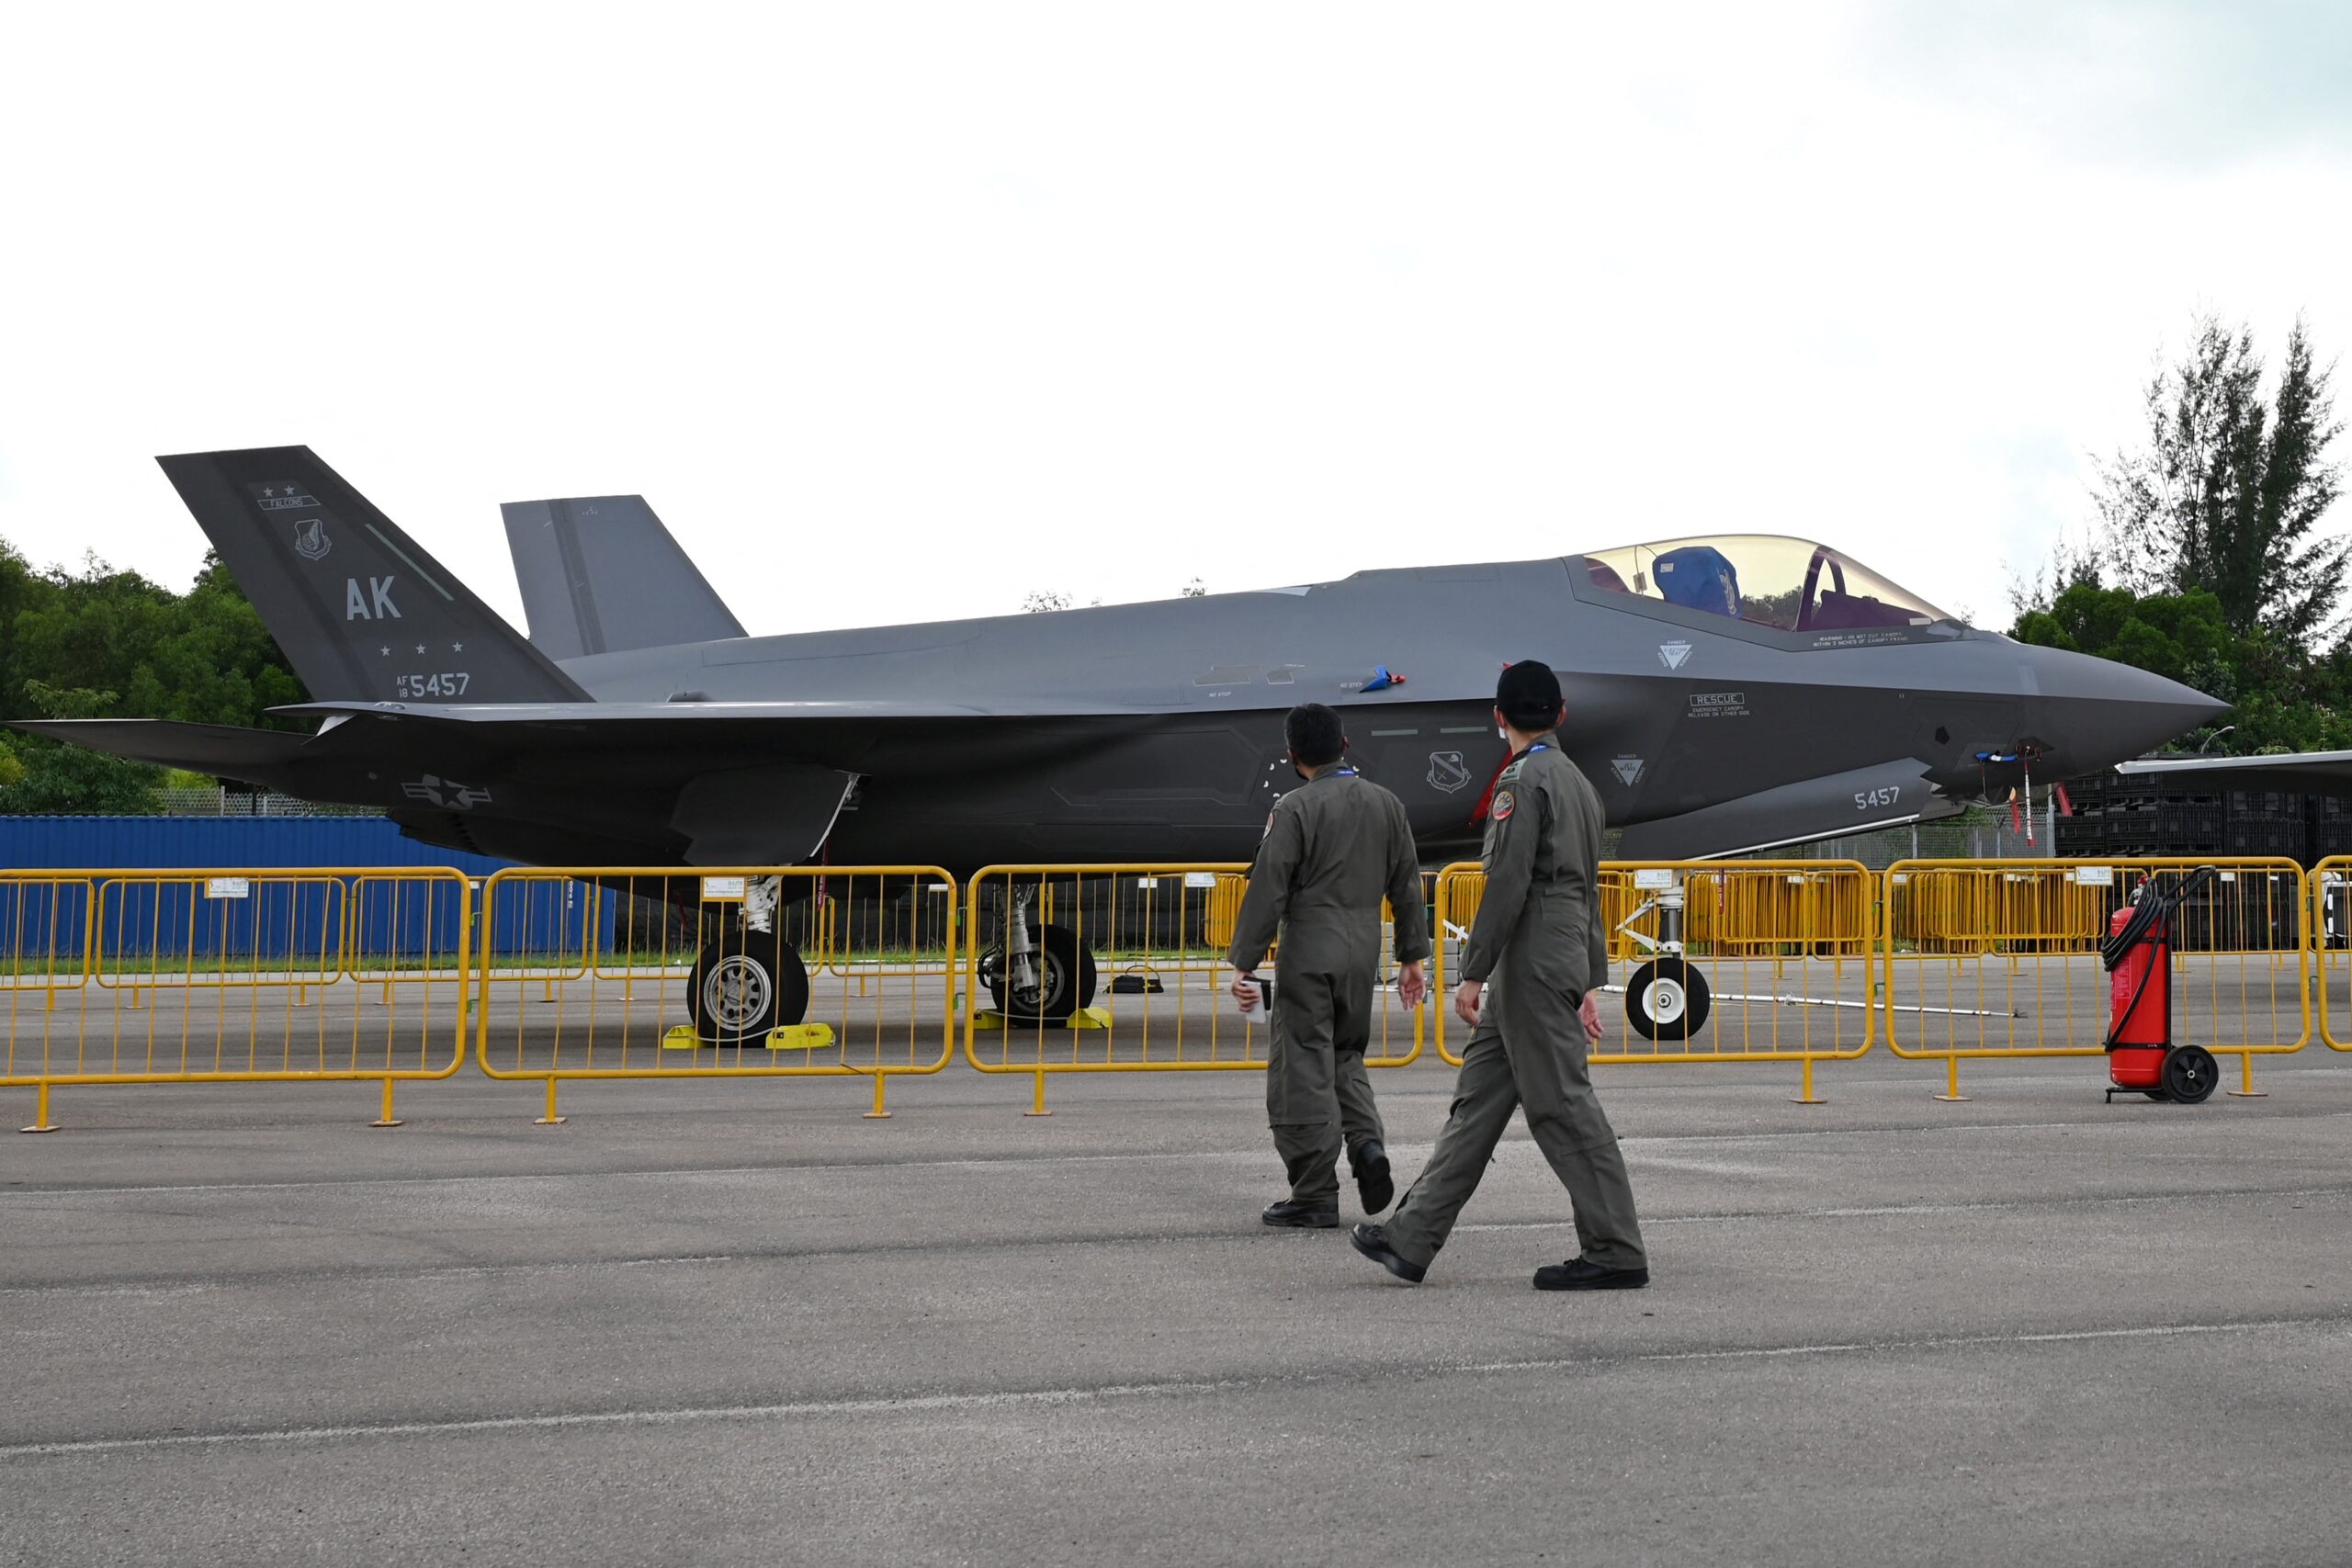 A U.S. Air Force F-35A on static display during the Singapore Airshow on February 15, 2022. <em>Photo by ROSLAN RAHMAN/AFP via Getty Images</em>